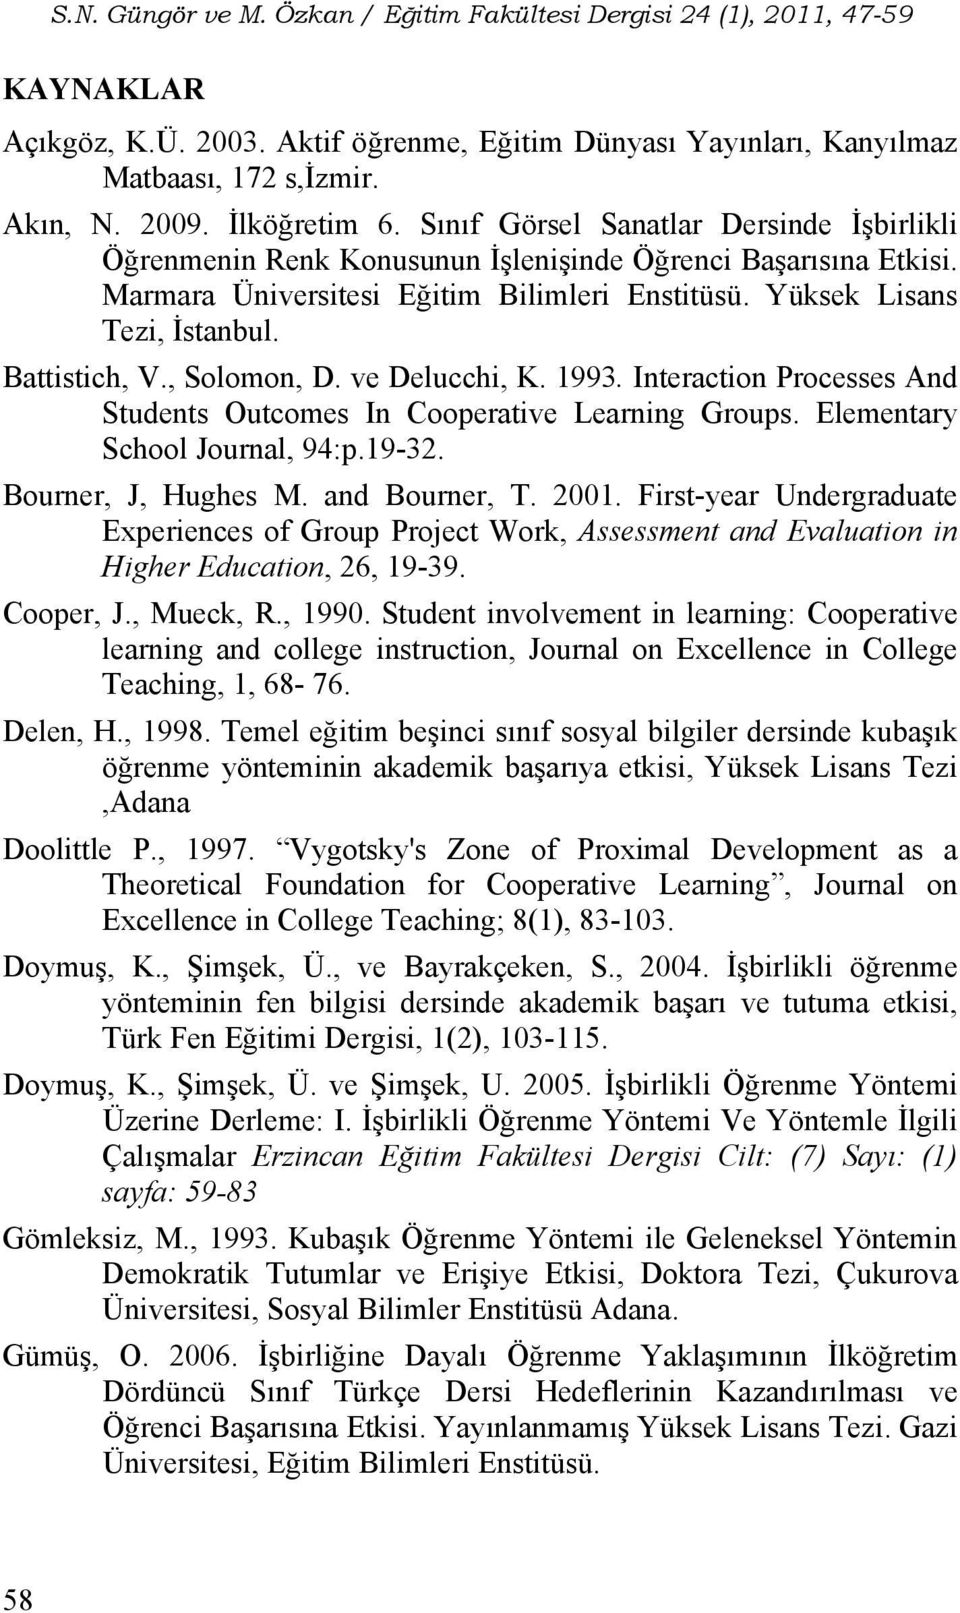 , Solomon, D. ve Delucchi, K. 1993. Interaction Processes And Students Outcomes In Cooperative Learning Groups. Elementary School Journal, 94:p.19-32. Bourner, J, Hughes M. and Bourner, T. 2001.